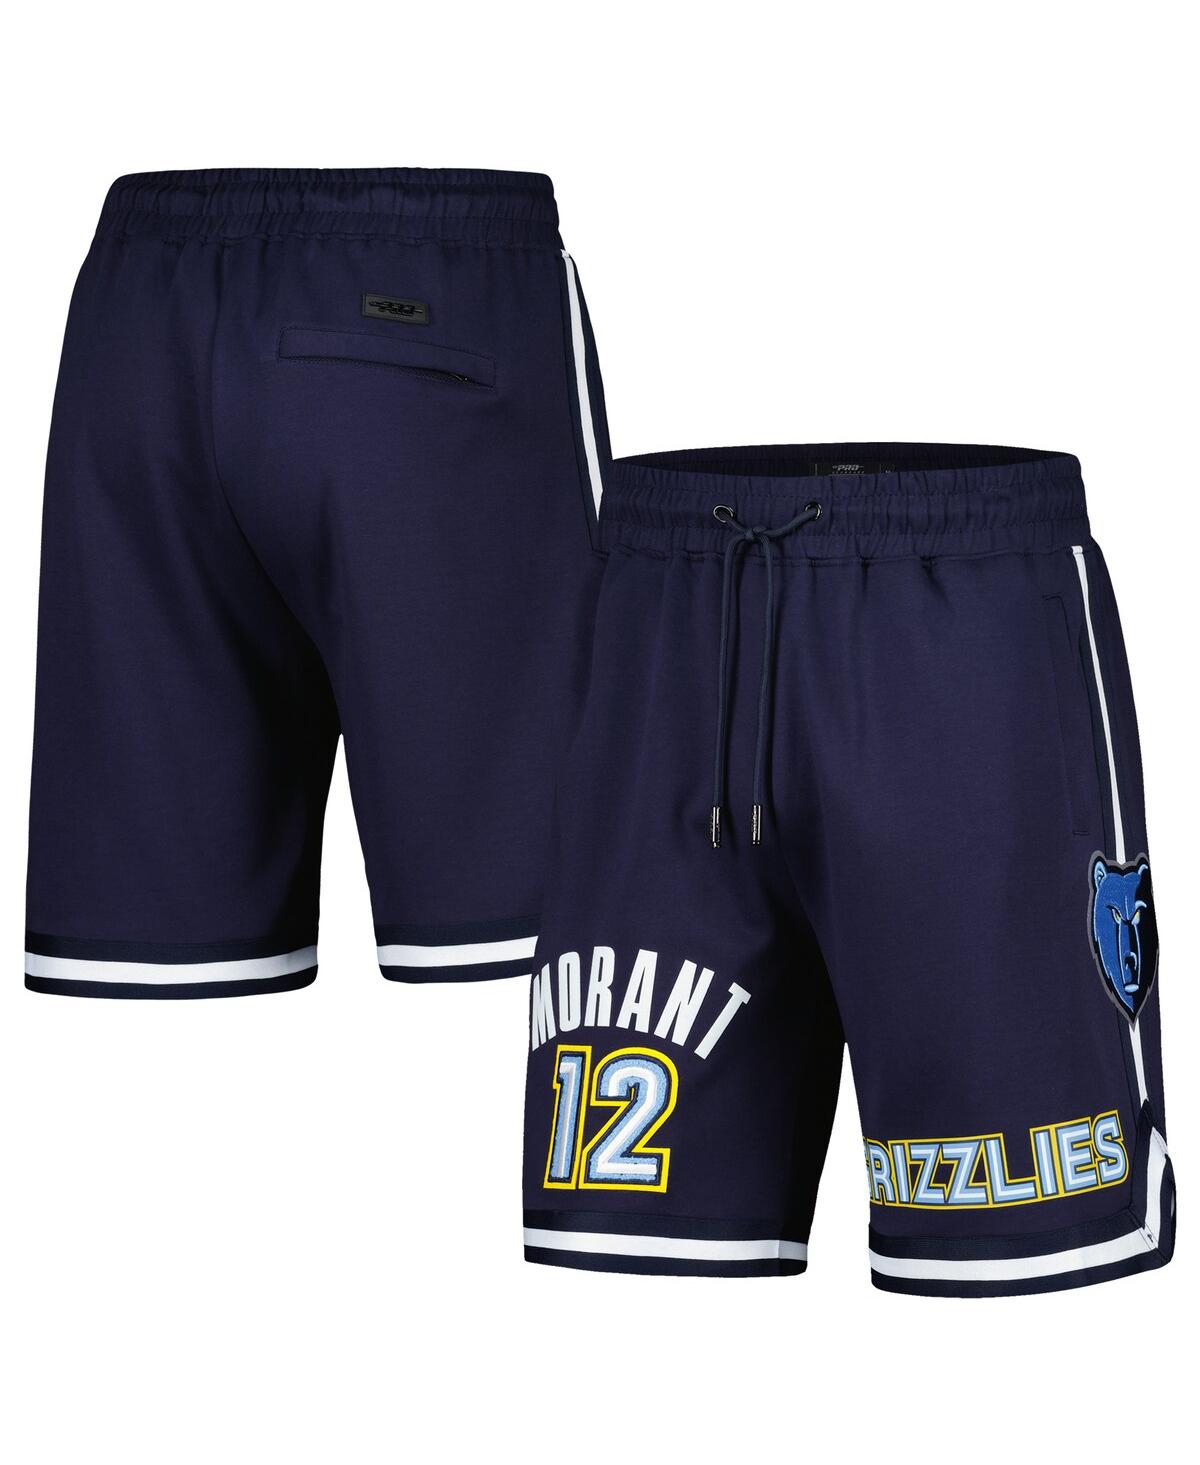 Men's Pro Standard Ja Morant Navy Memphis Grizzlies Player Name and Number Shorts - Navy